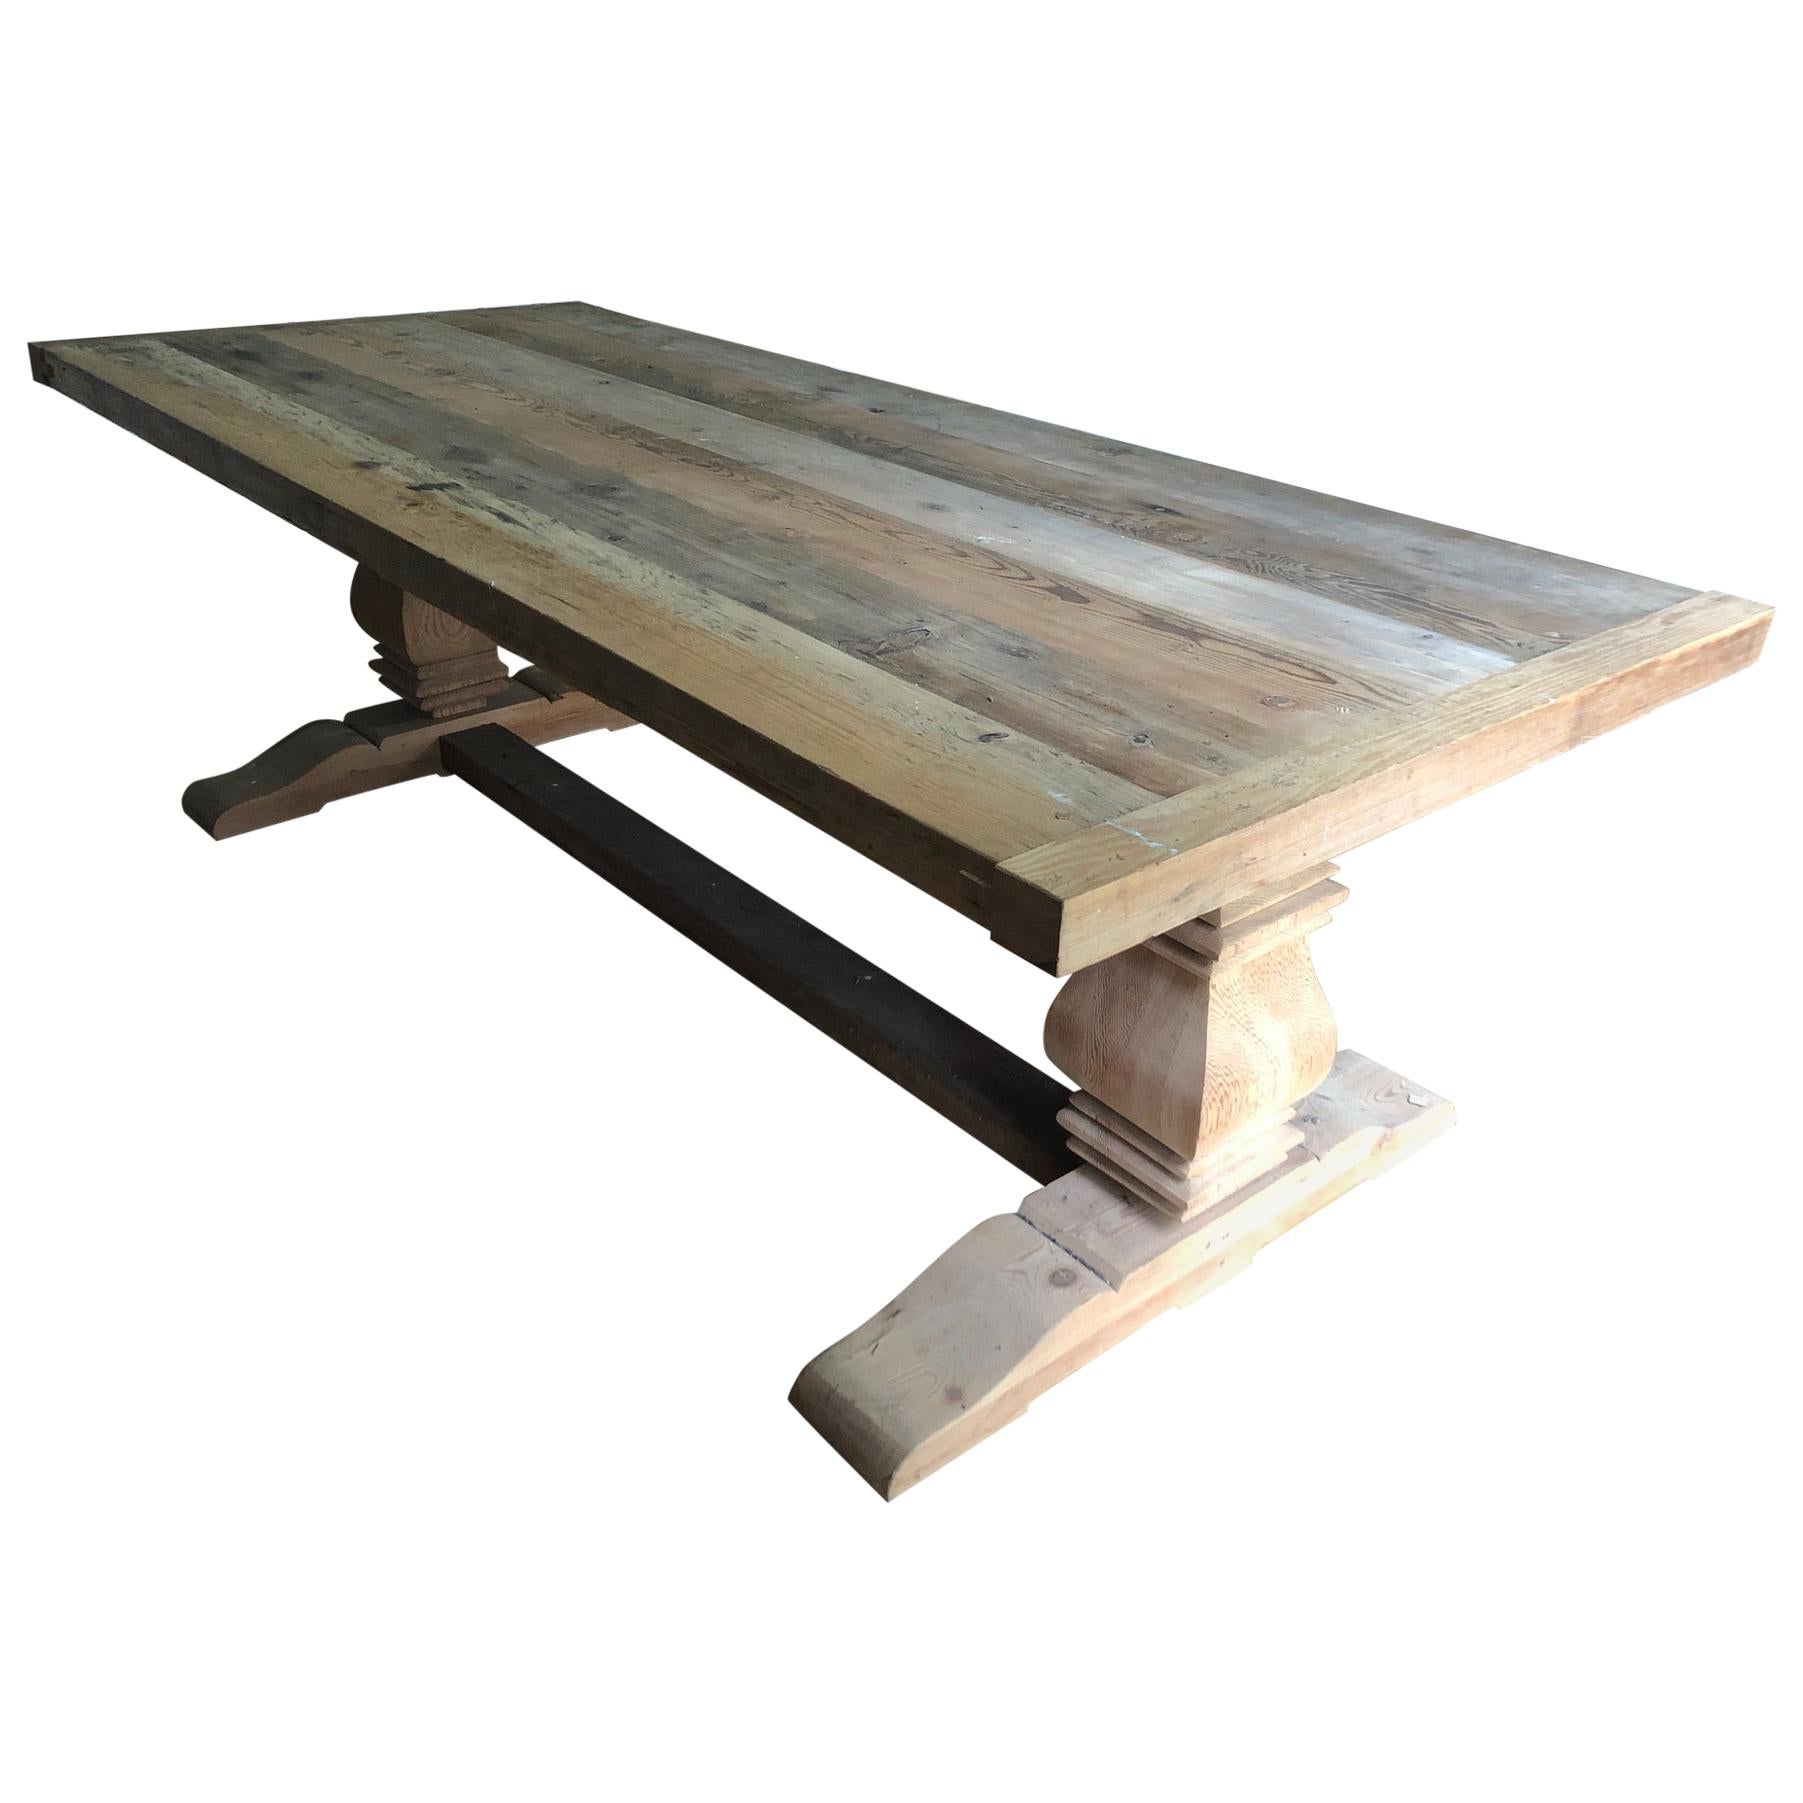 Super Large Wonderfully Rustic Handcrafted Trestle Farm Table Dining Table